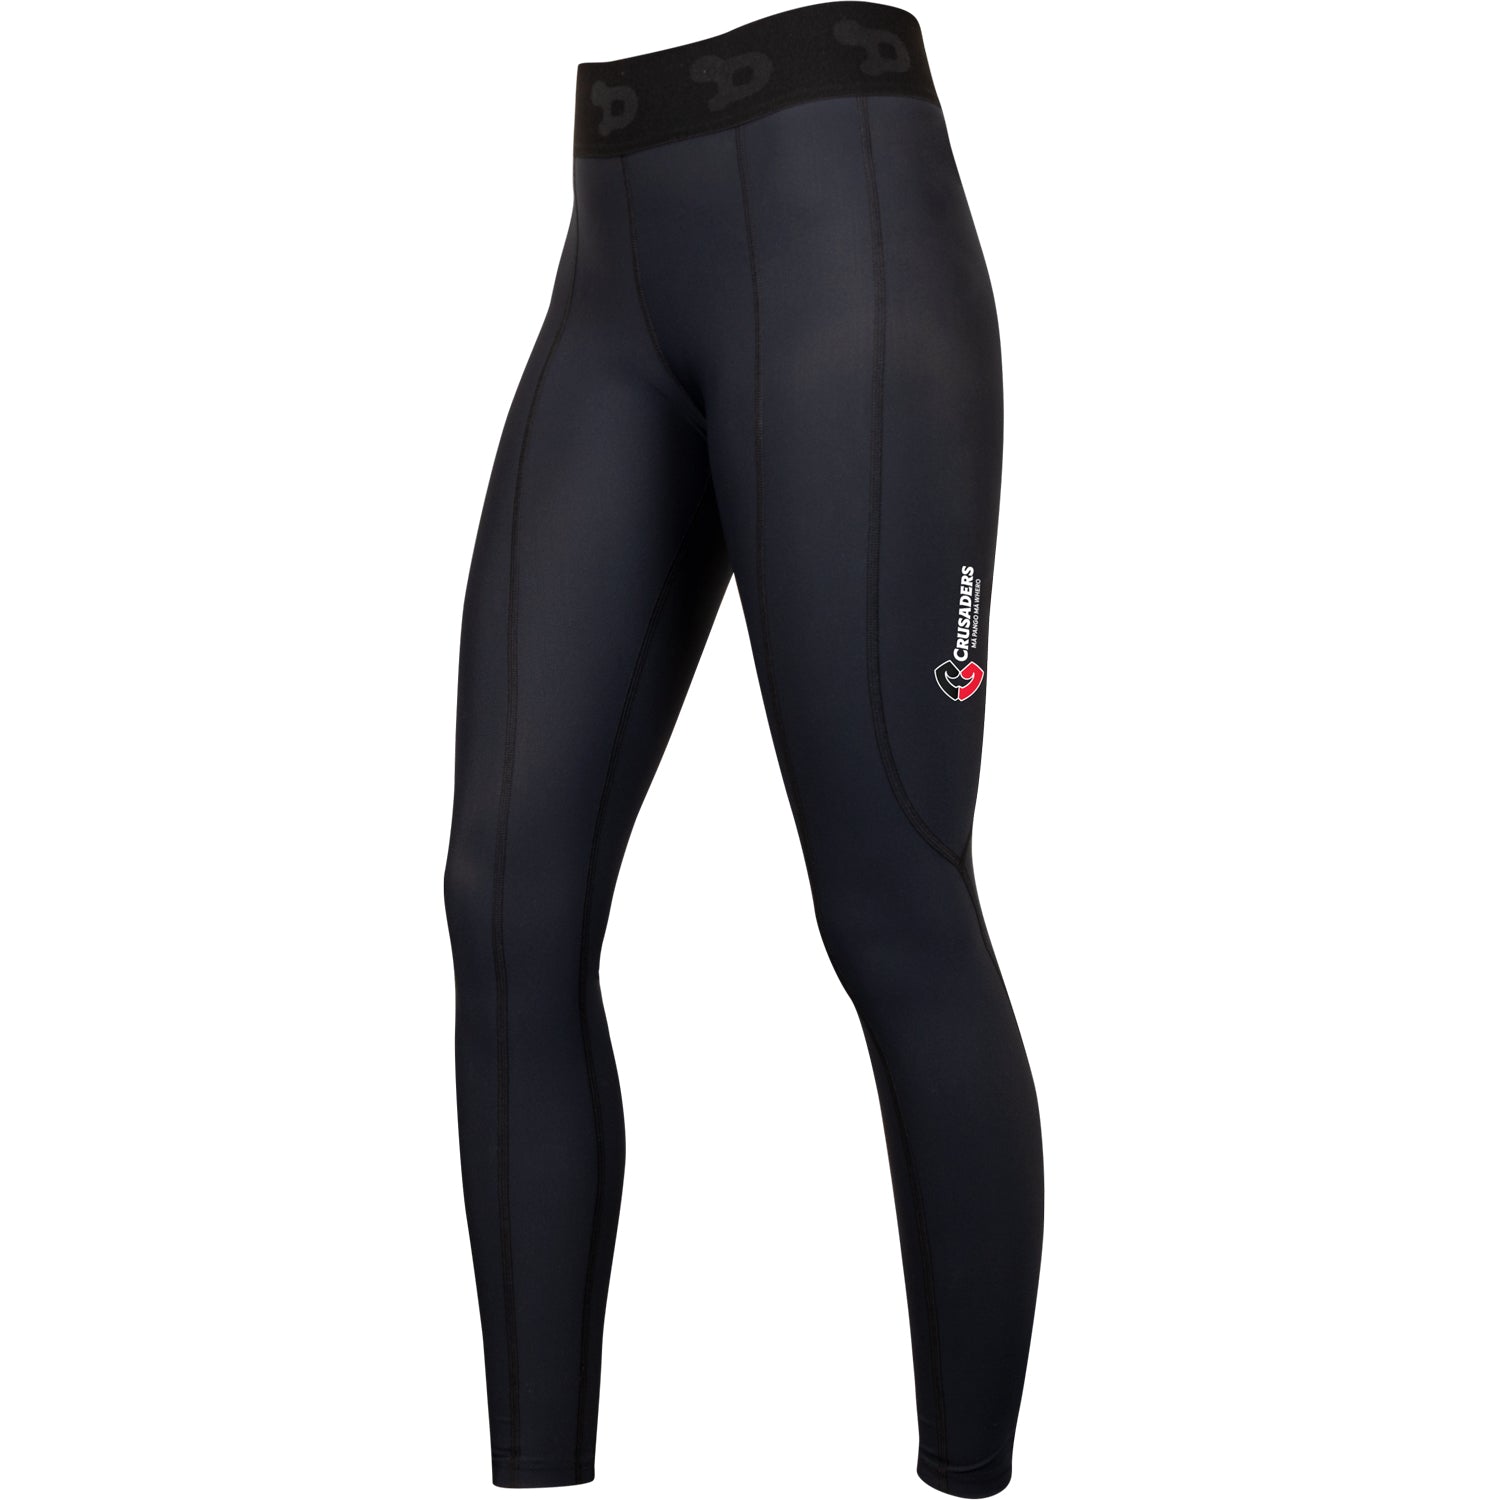 Crusaders Ladies Compression Tights – New Zealand Super Rugby Clubs